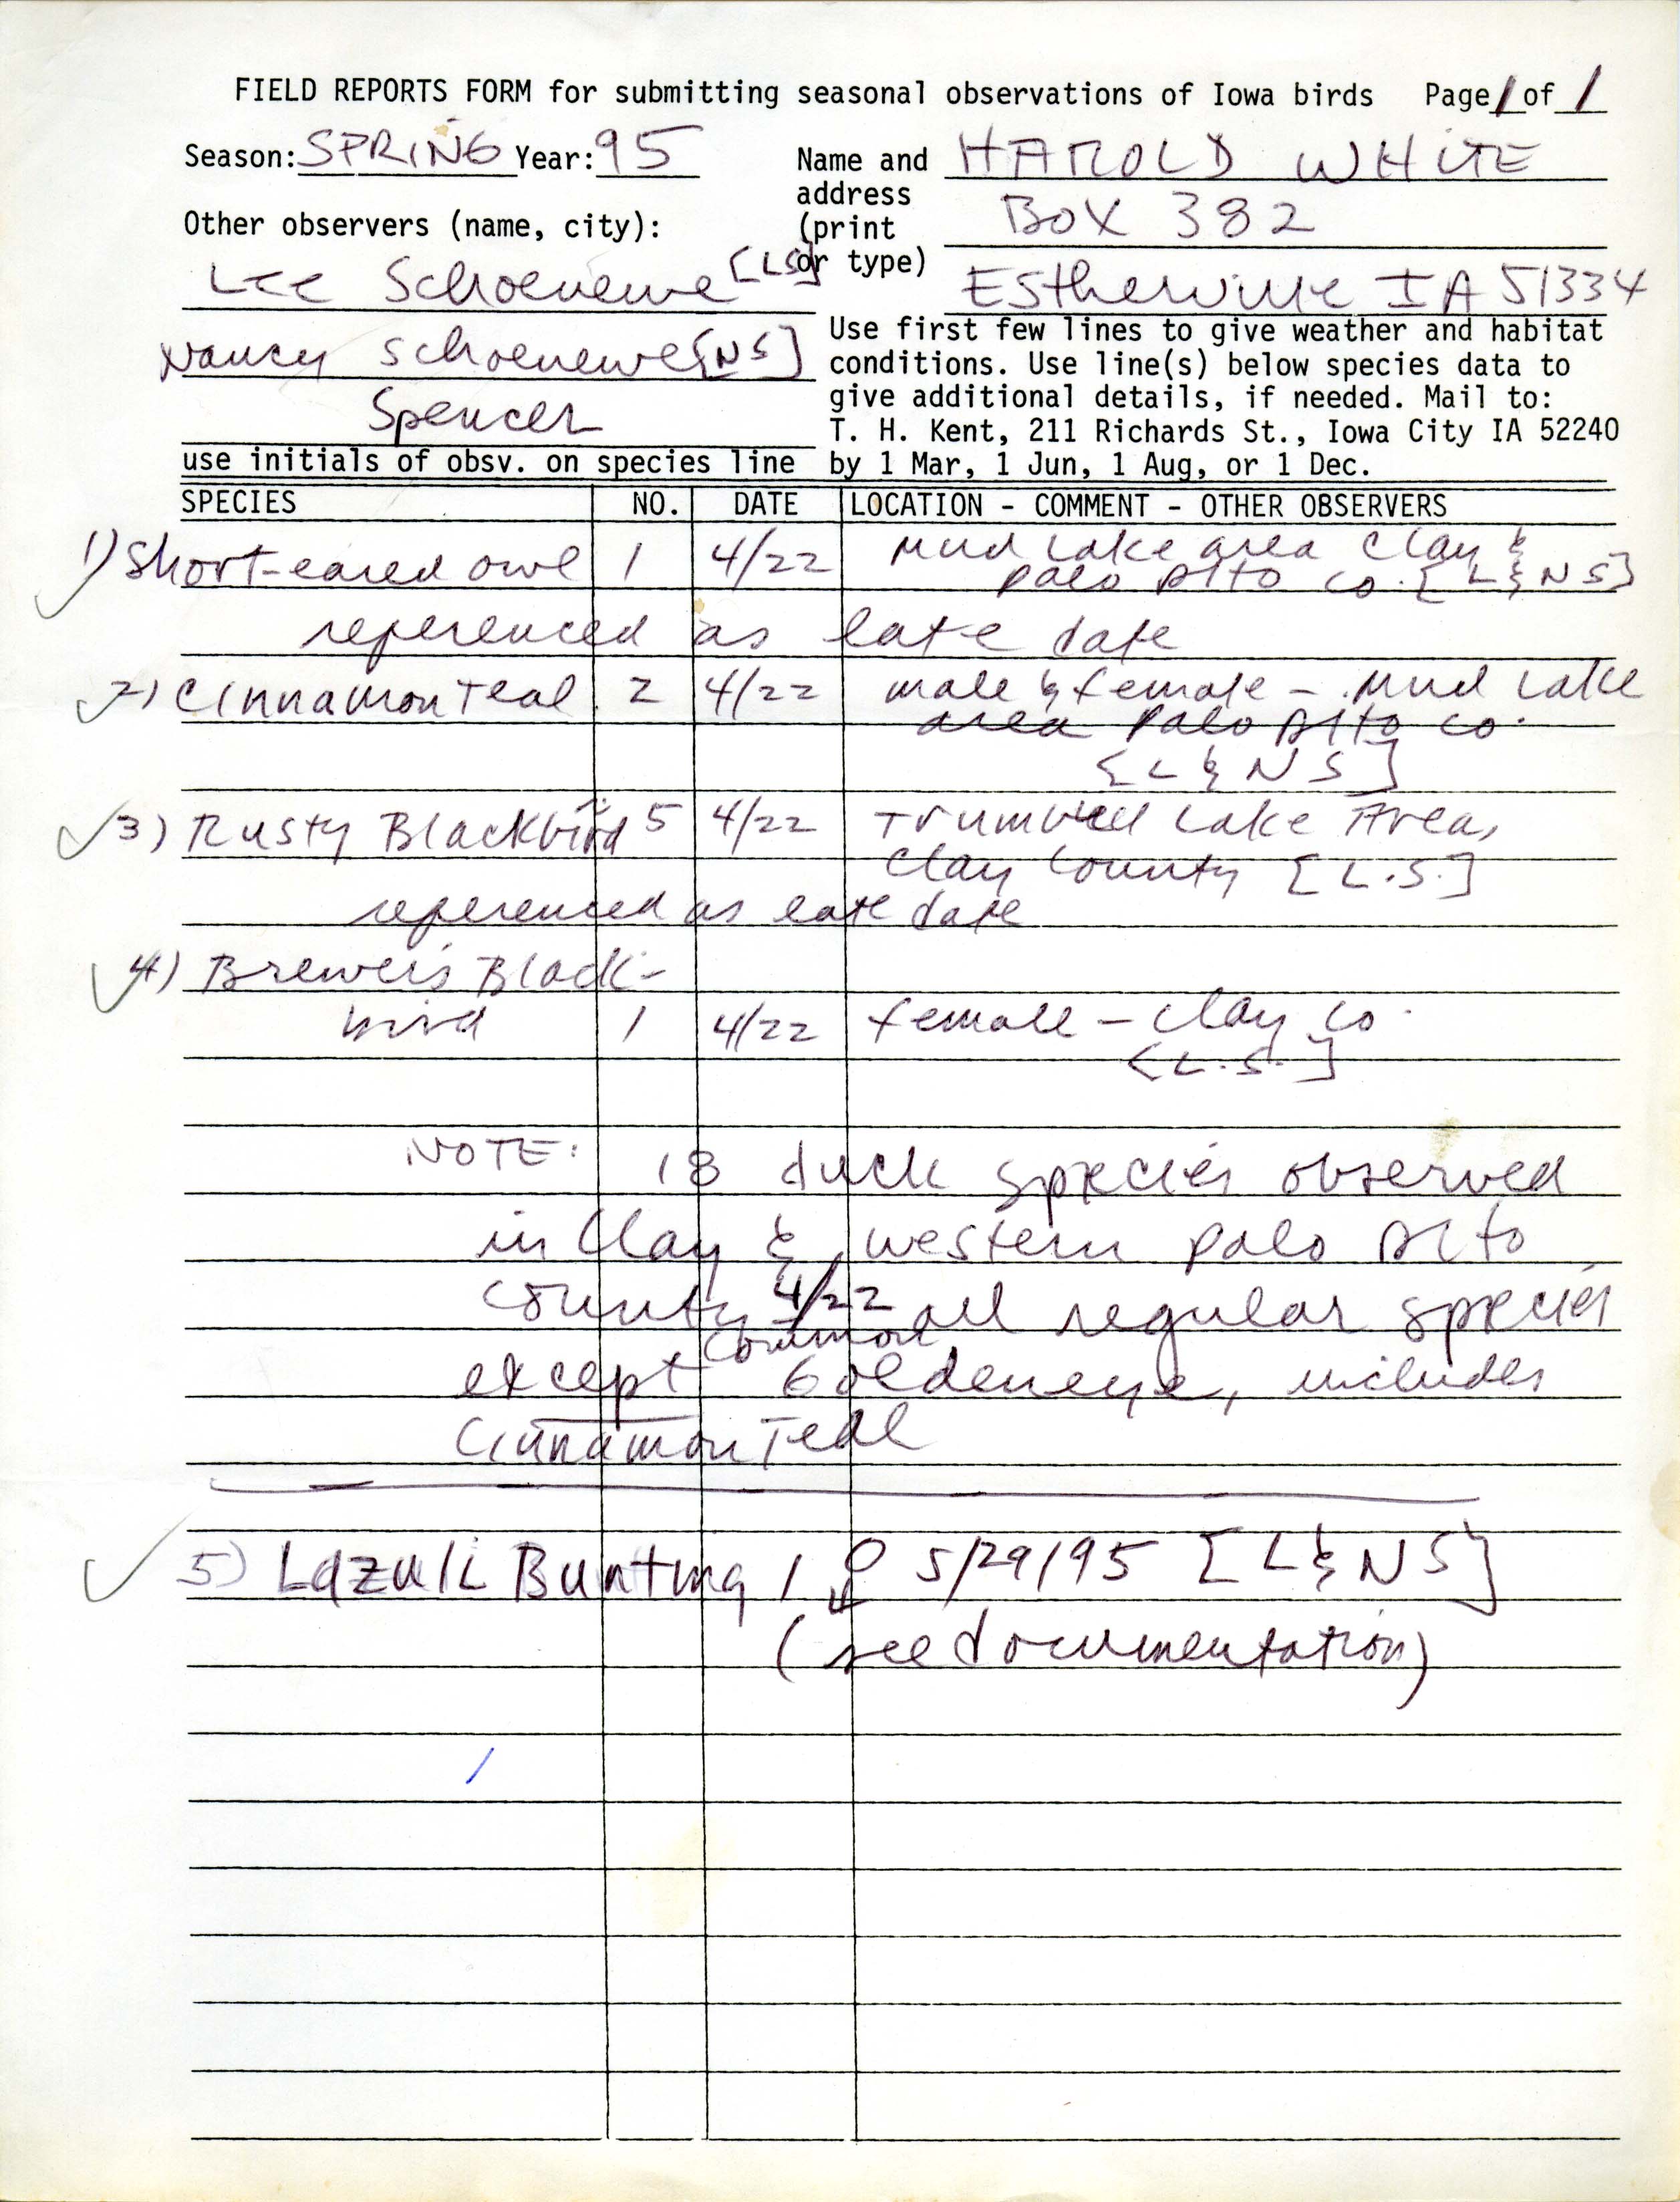 Field reports form for submitting seasonal observations of Iowa birds, spring 1995, Harold White